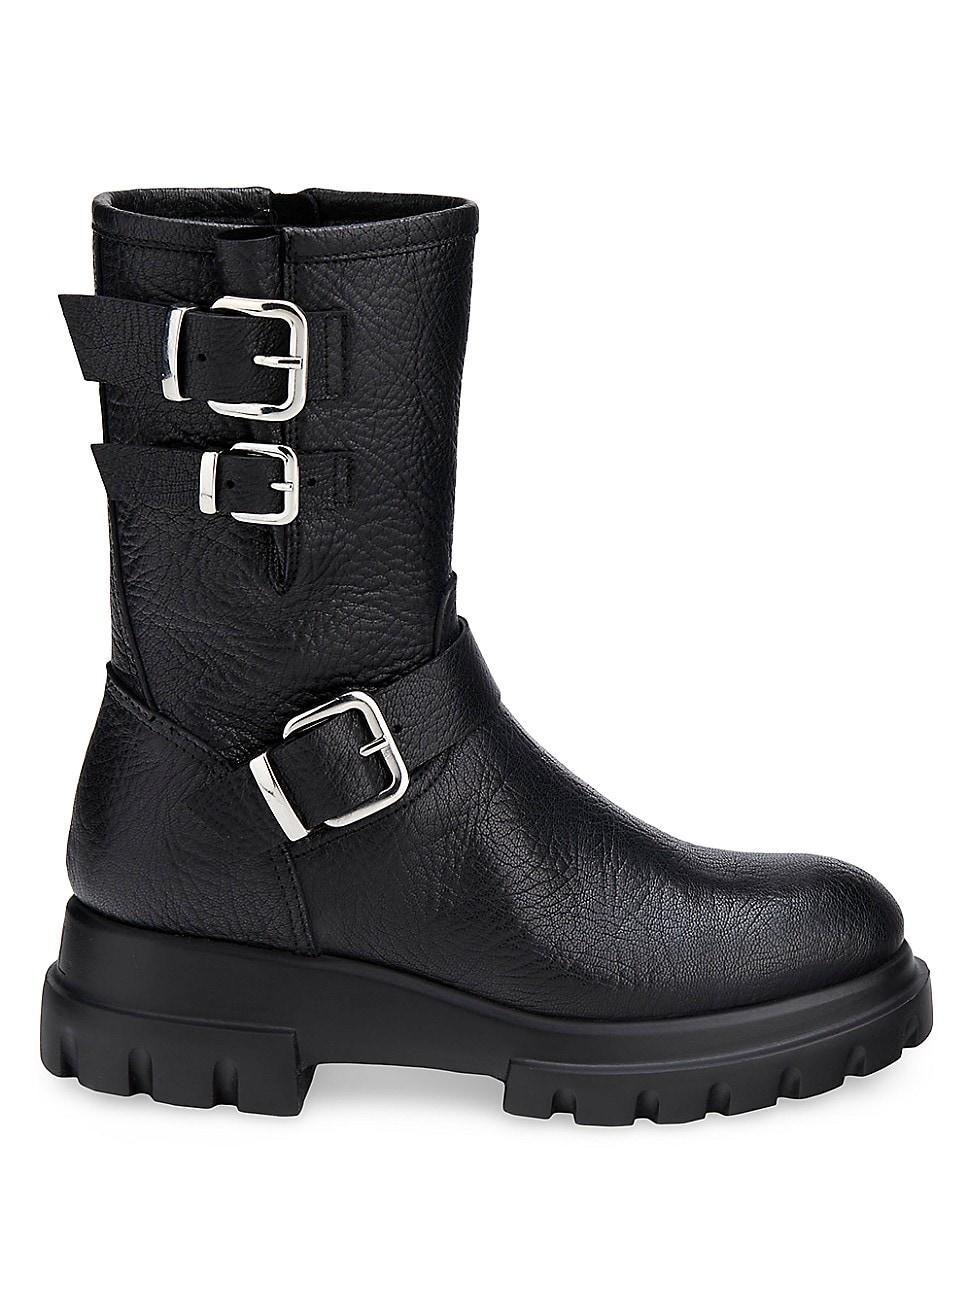 AGL The Chunky Biker Lug Sole Leather Boot Product Image